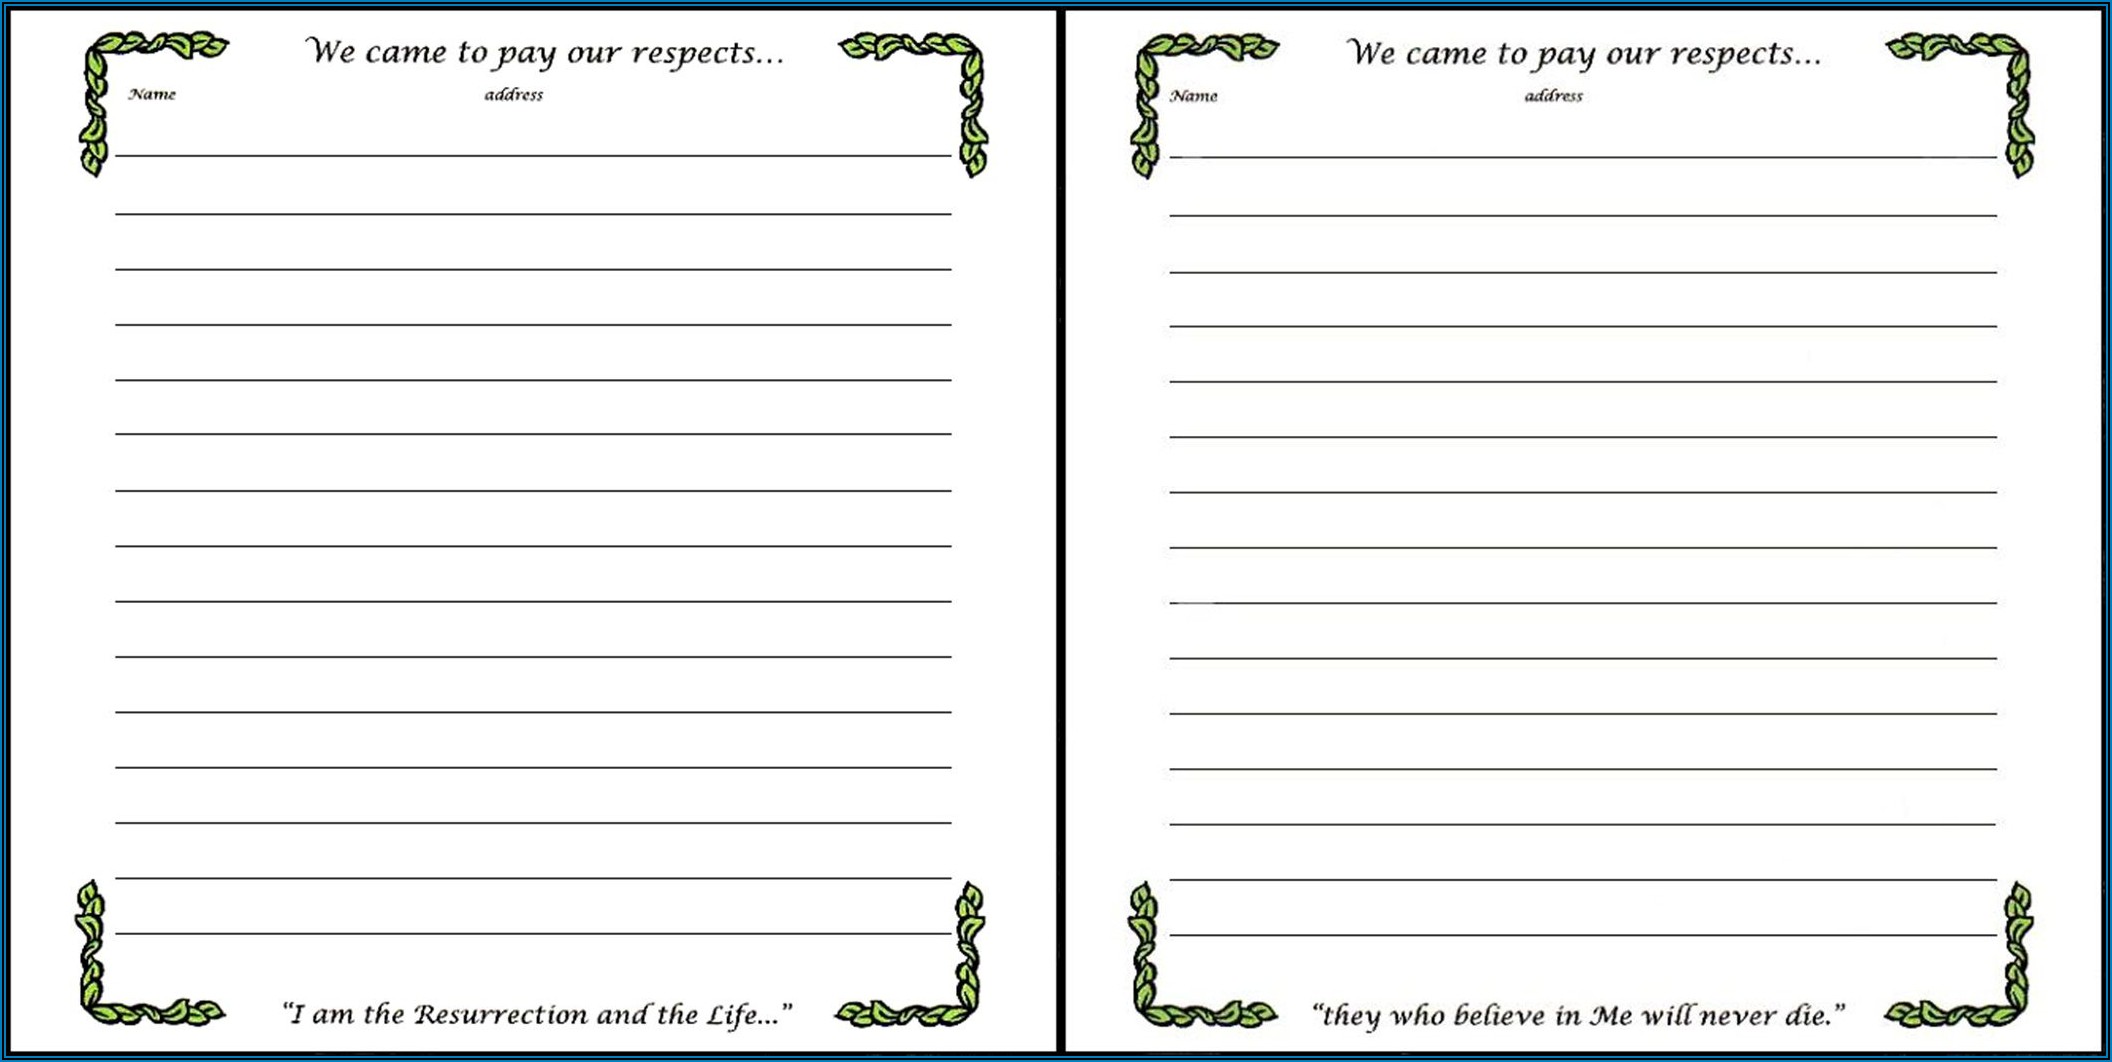 Free Printable Funeral Guest Book Template